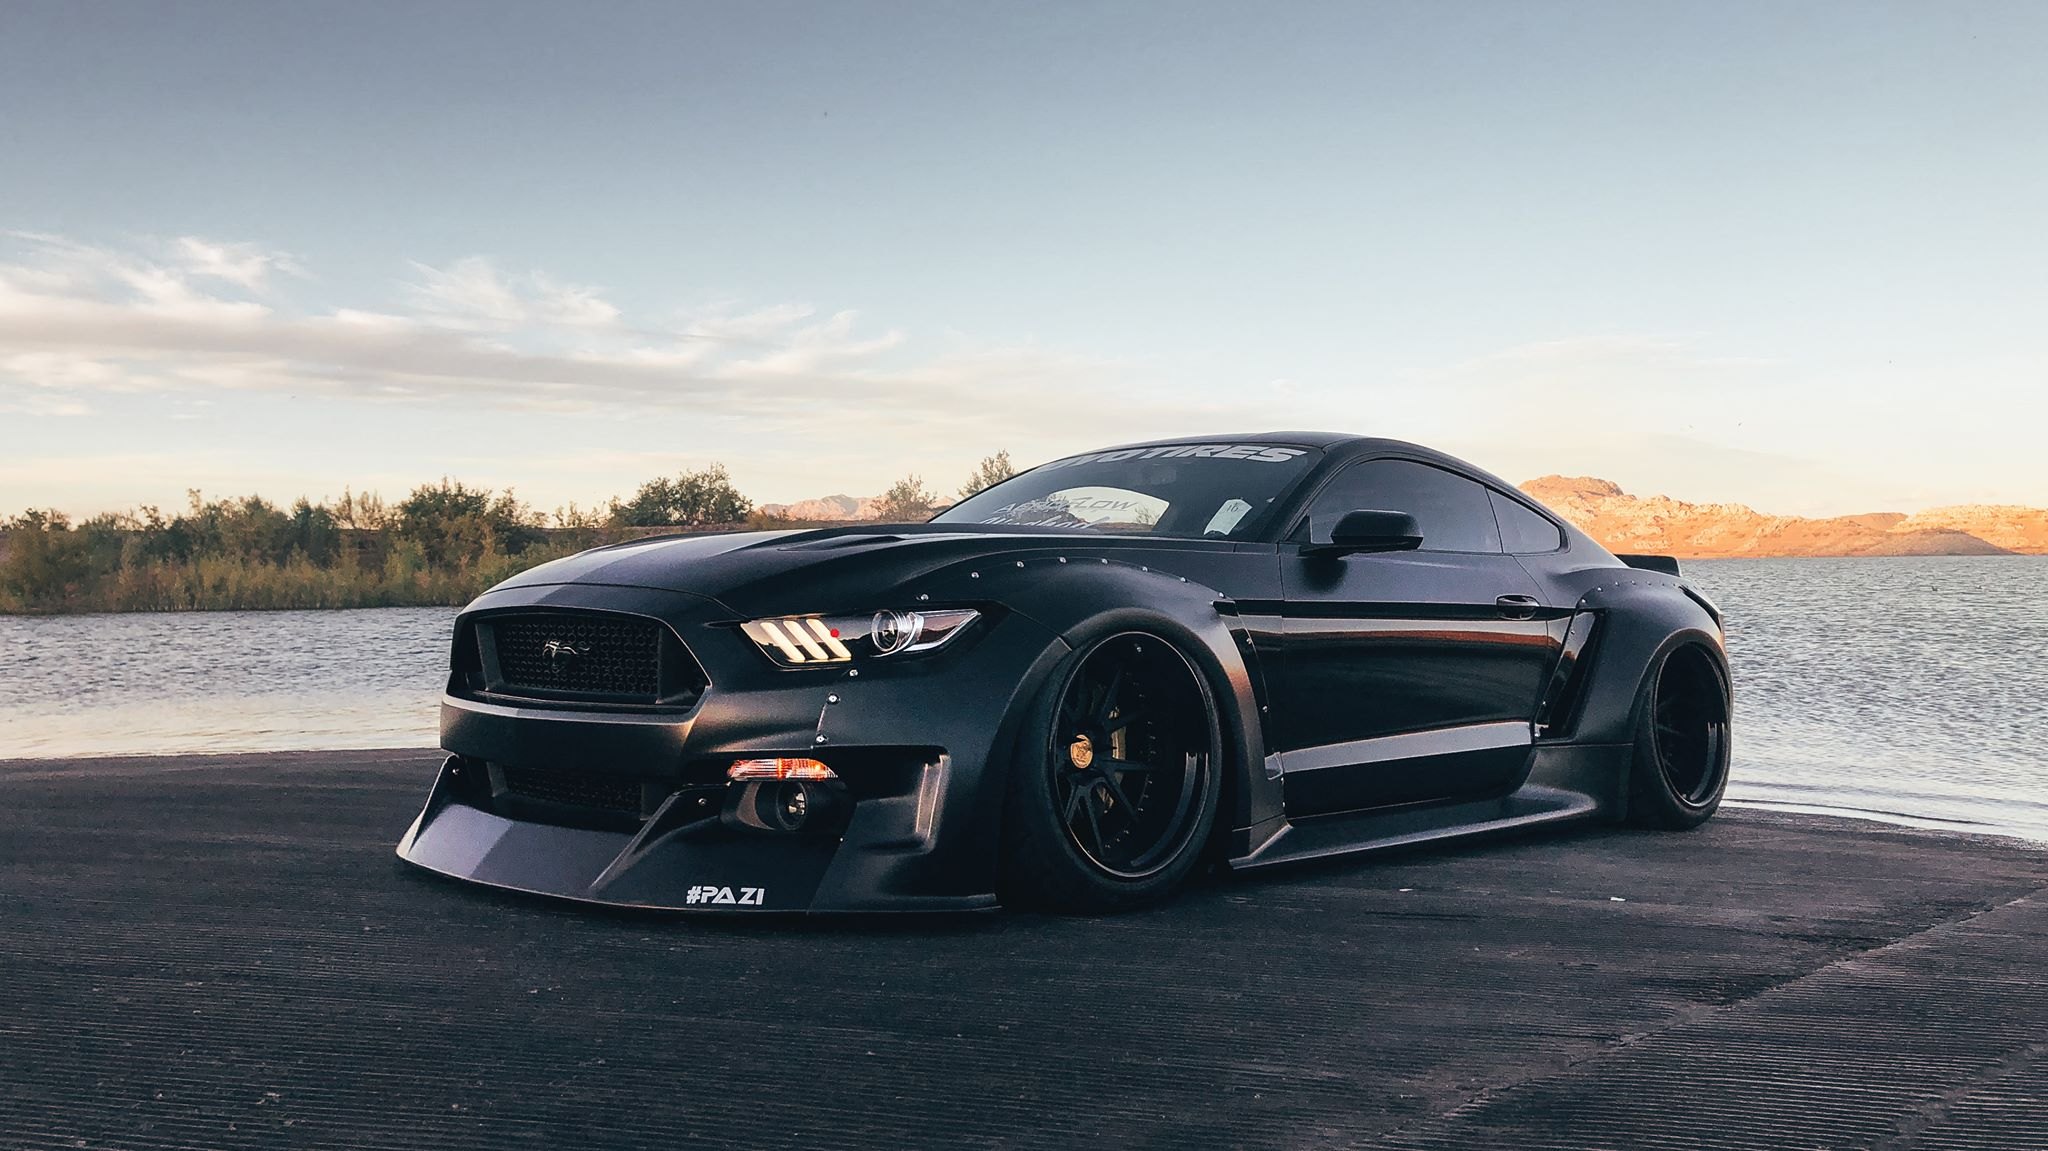 Fromt Bumper with Fog Lights on Black Ford Mustang - Photo by Clinched